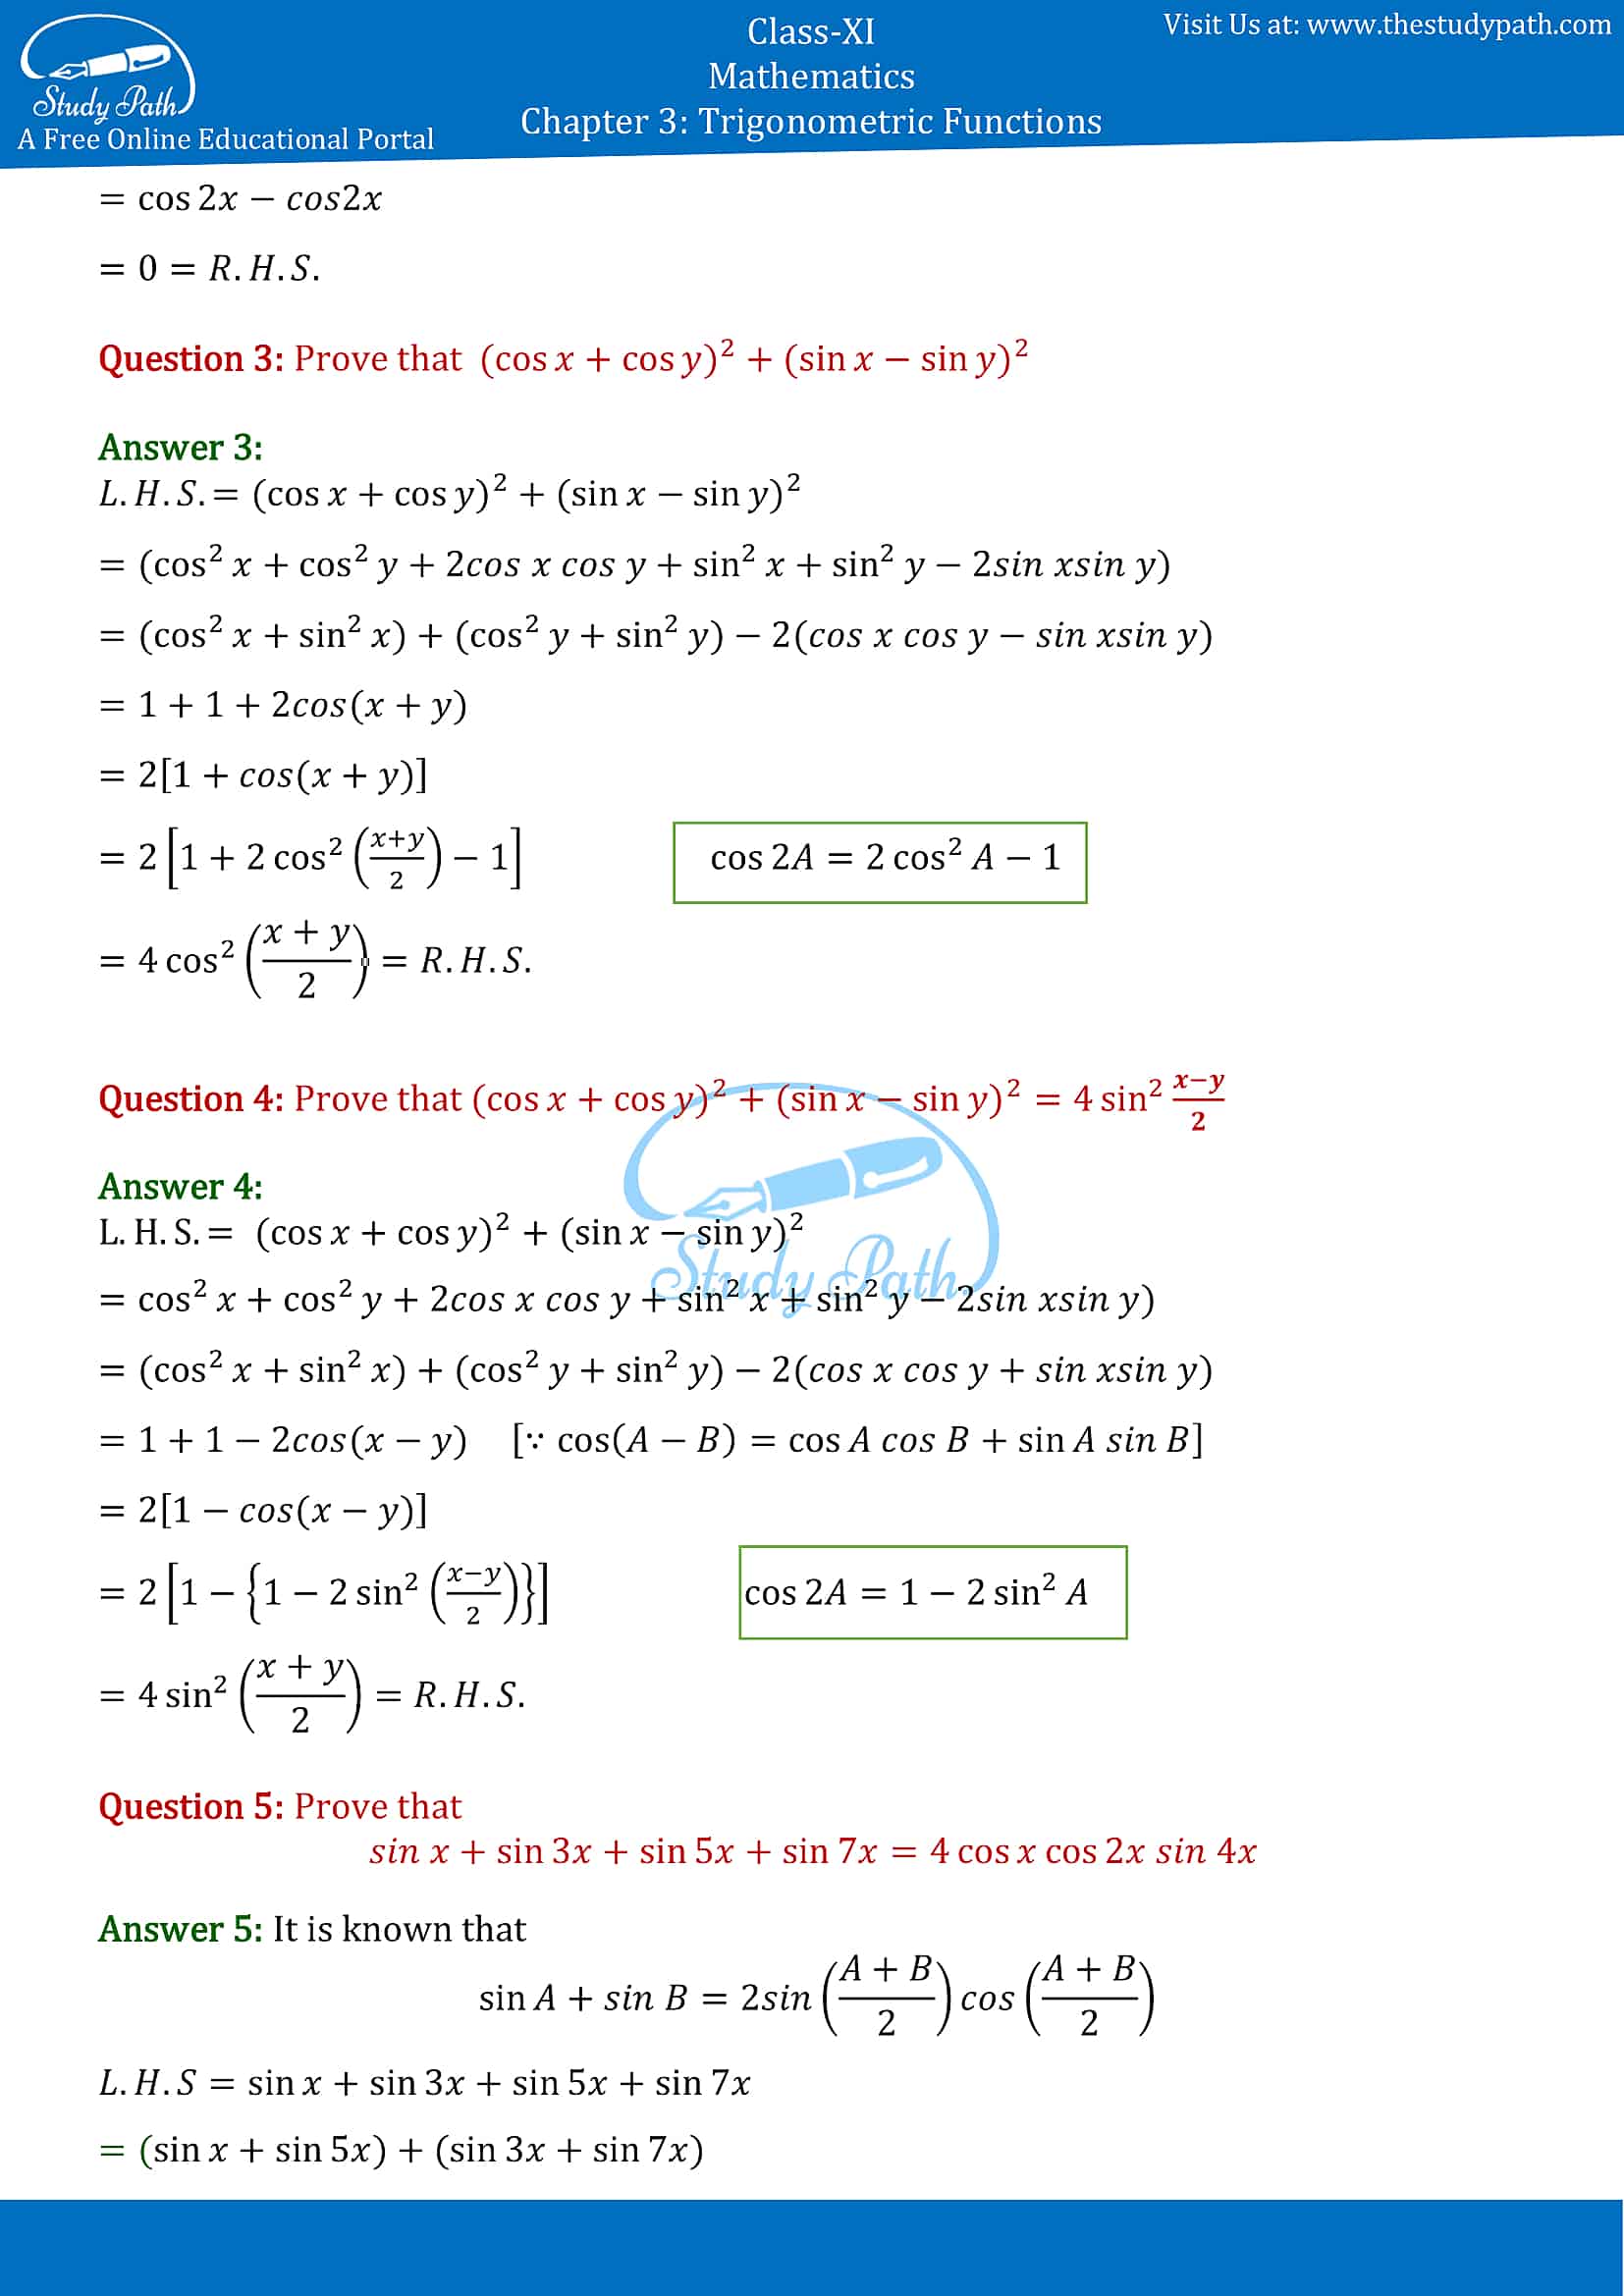 NCERT Solutions for Class 11 Maths Chapter 3 Trigonometric Functions Miscellaneous Exercise